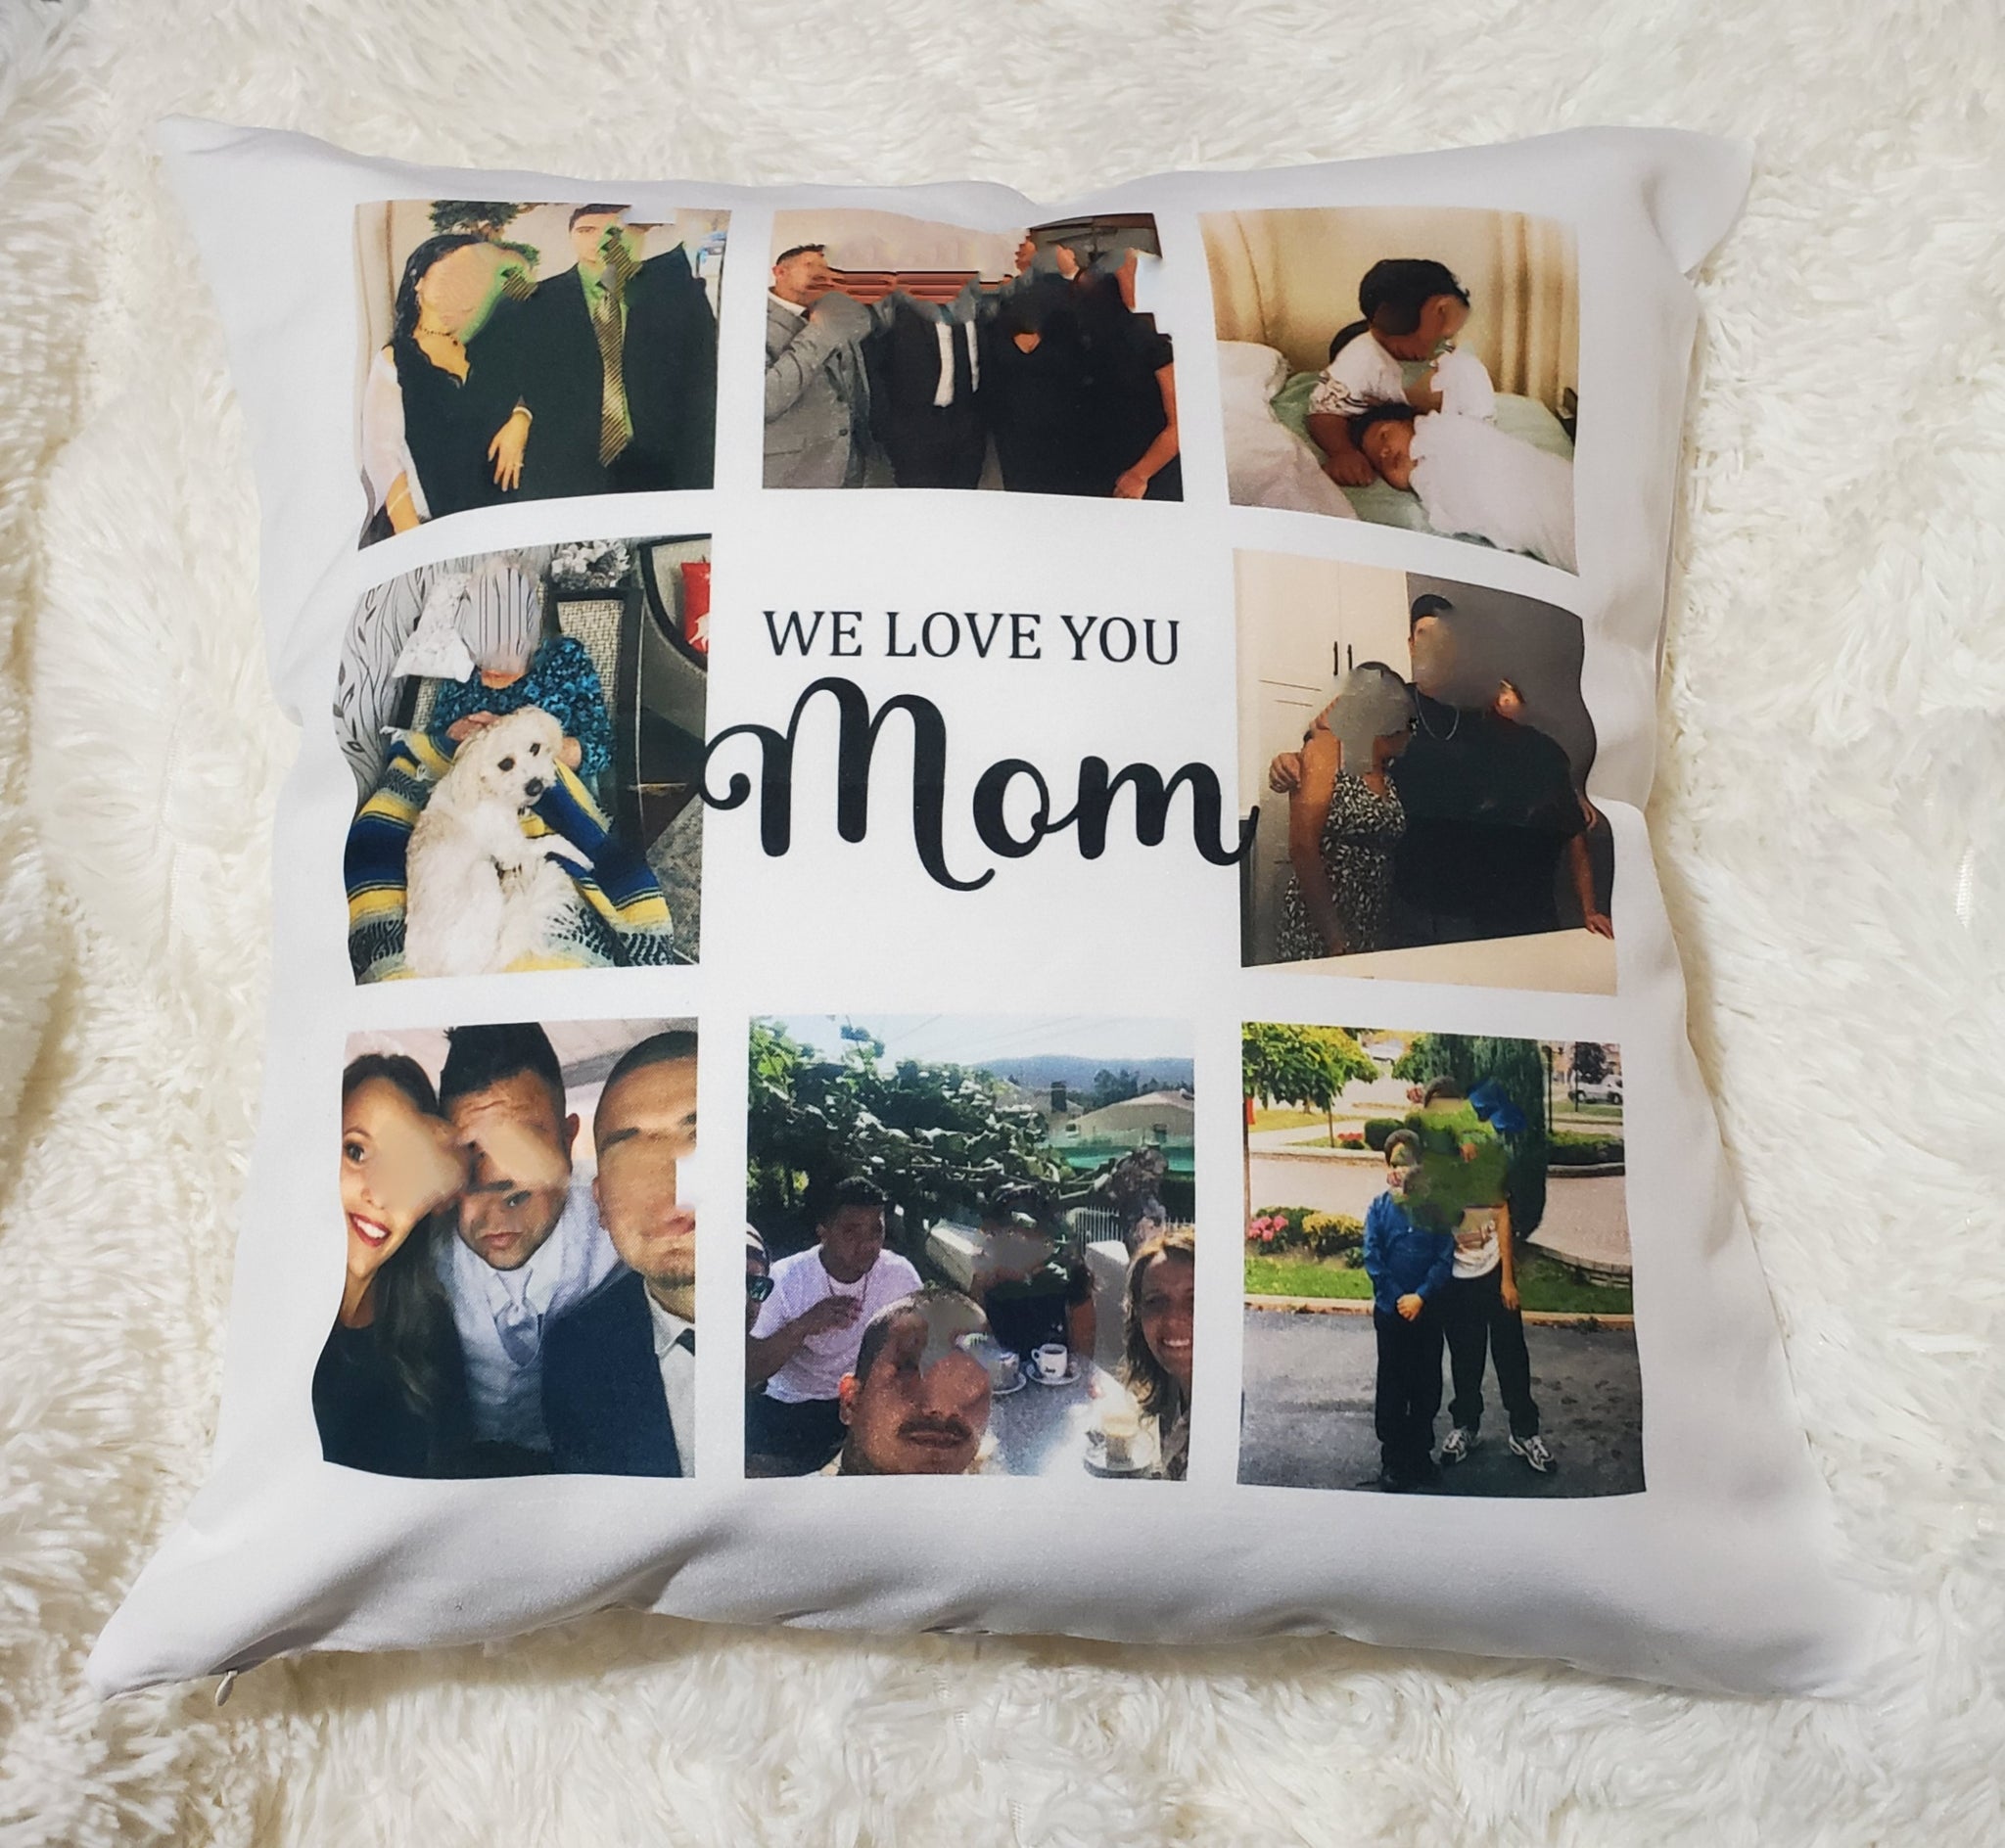 Your Personalized Photo Collage Pillow, Create Your Own Pillow